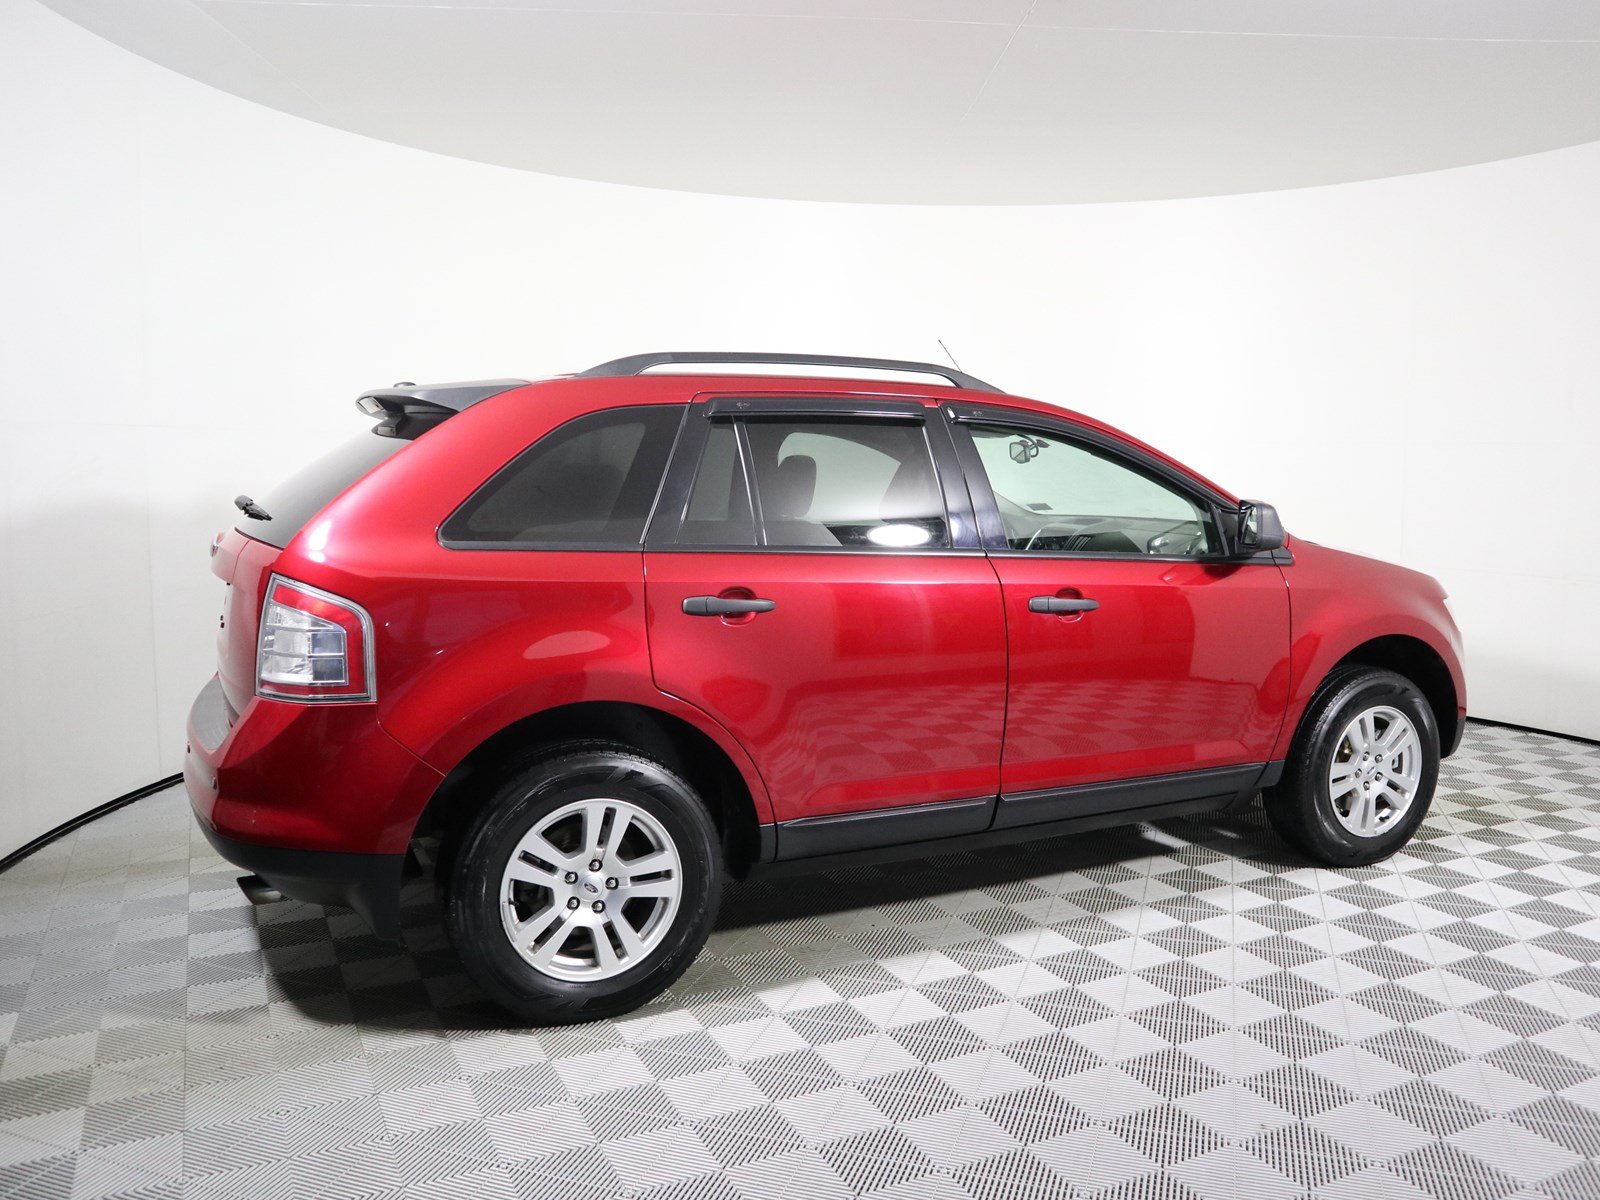 Pre-Owned 2010 Ford Edge SE Station Wagon in Parkersburg #F19036A